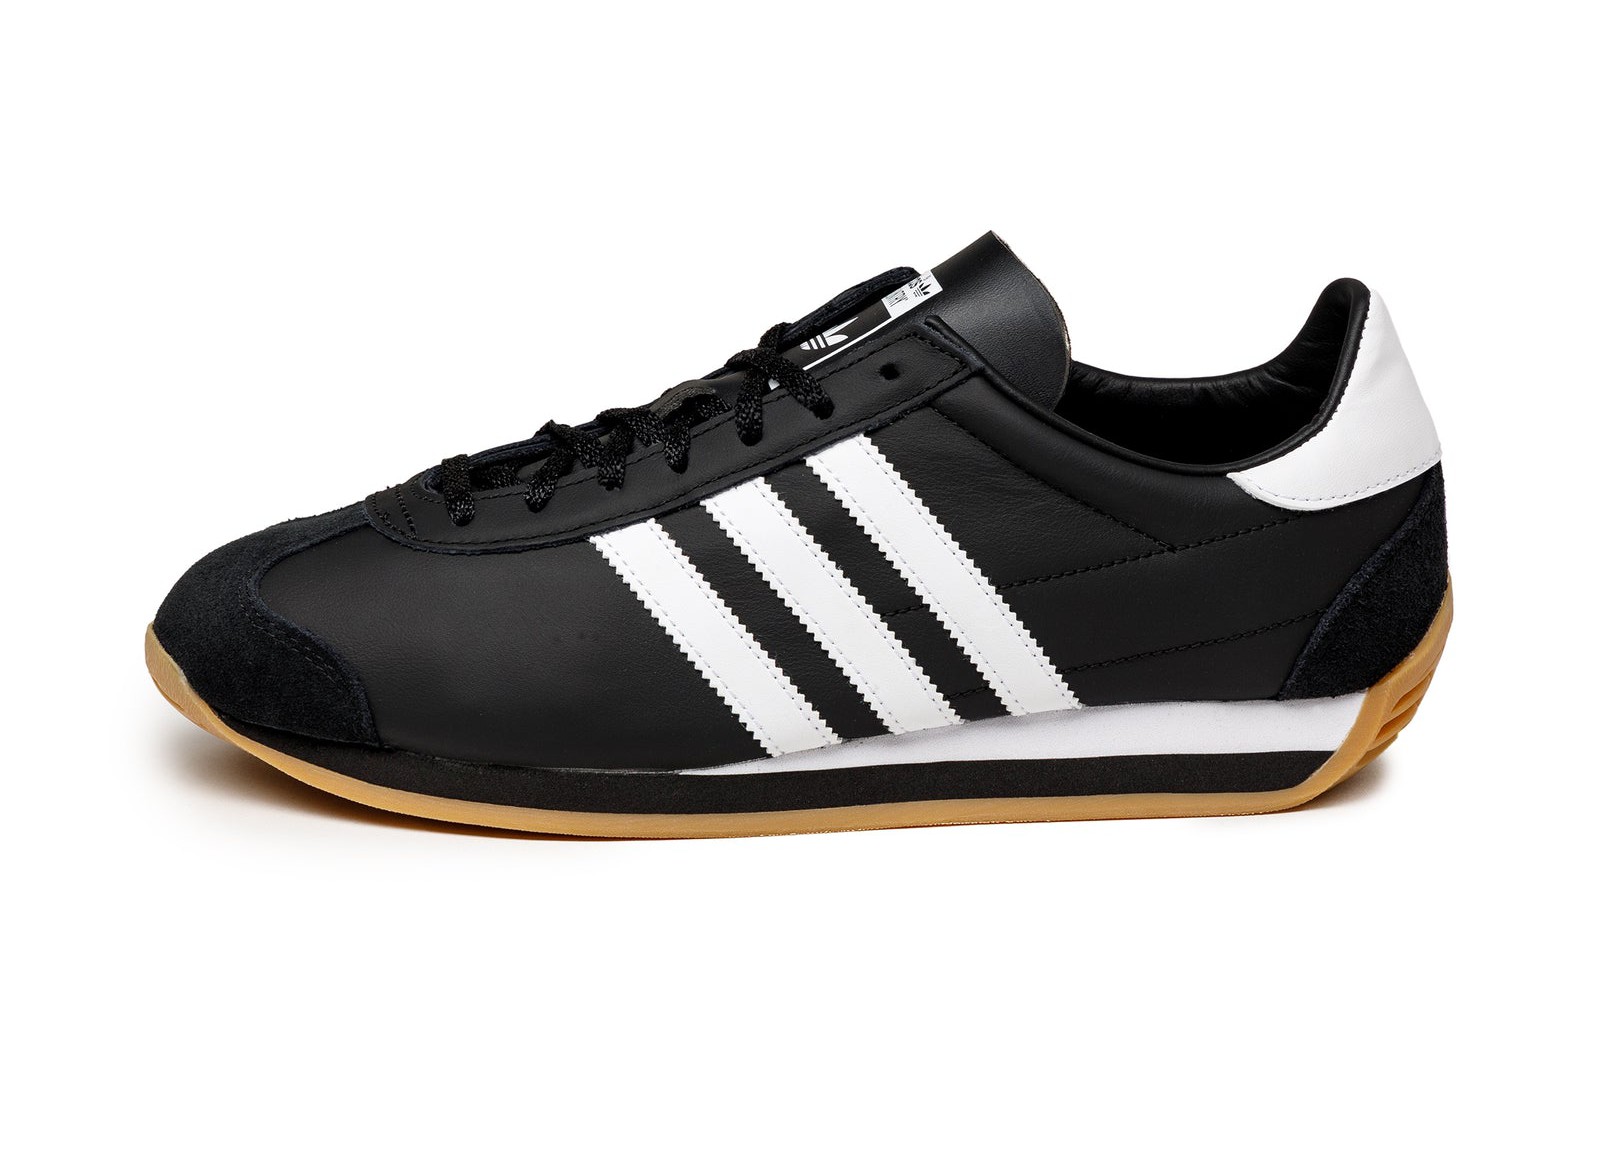 Adidas Country OG
Core Black / Footwear White